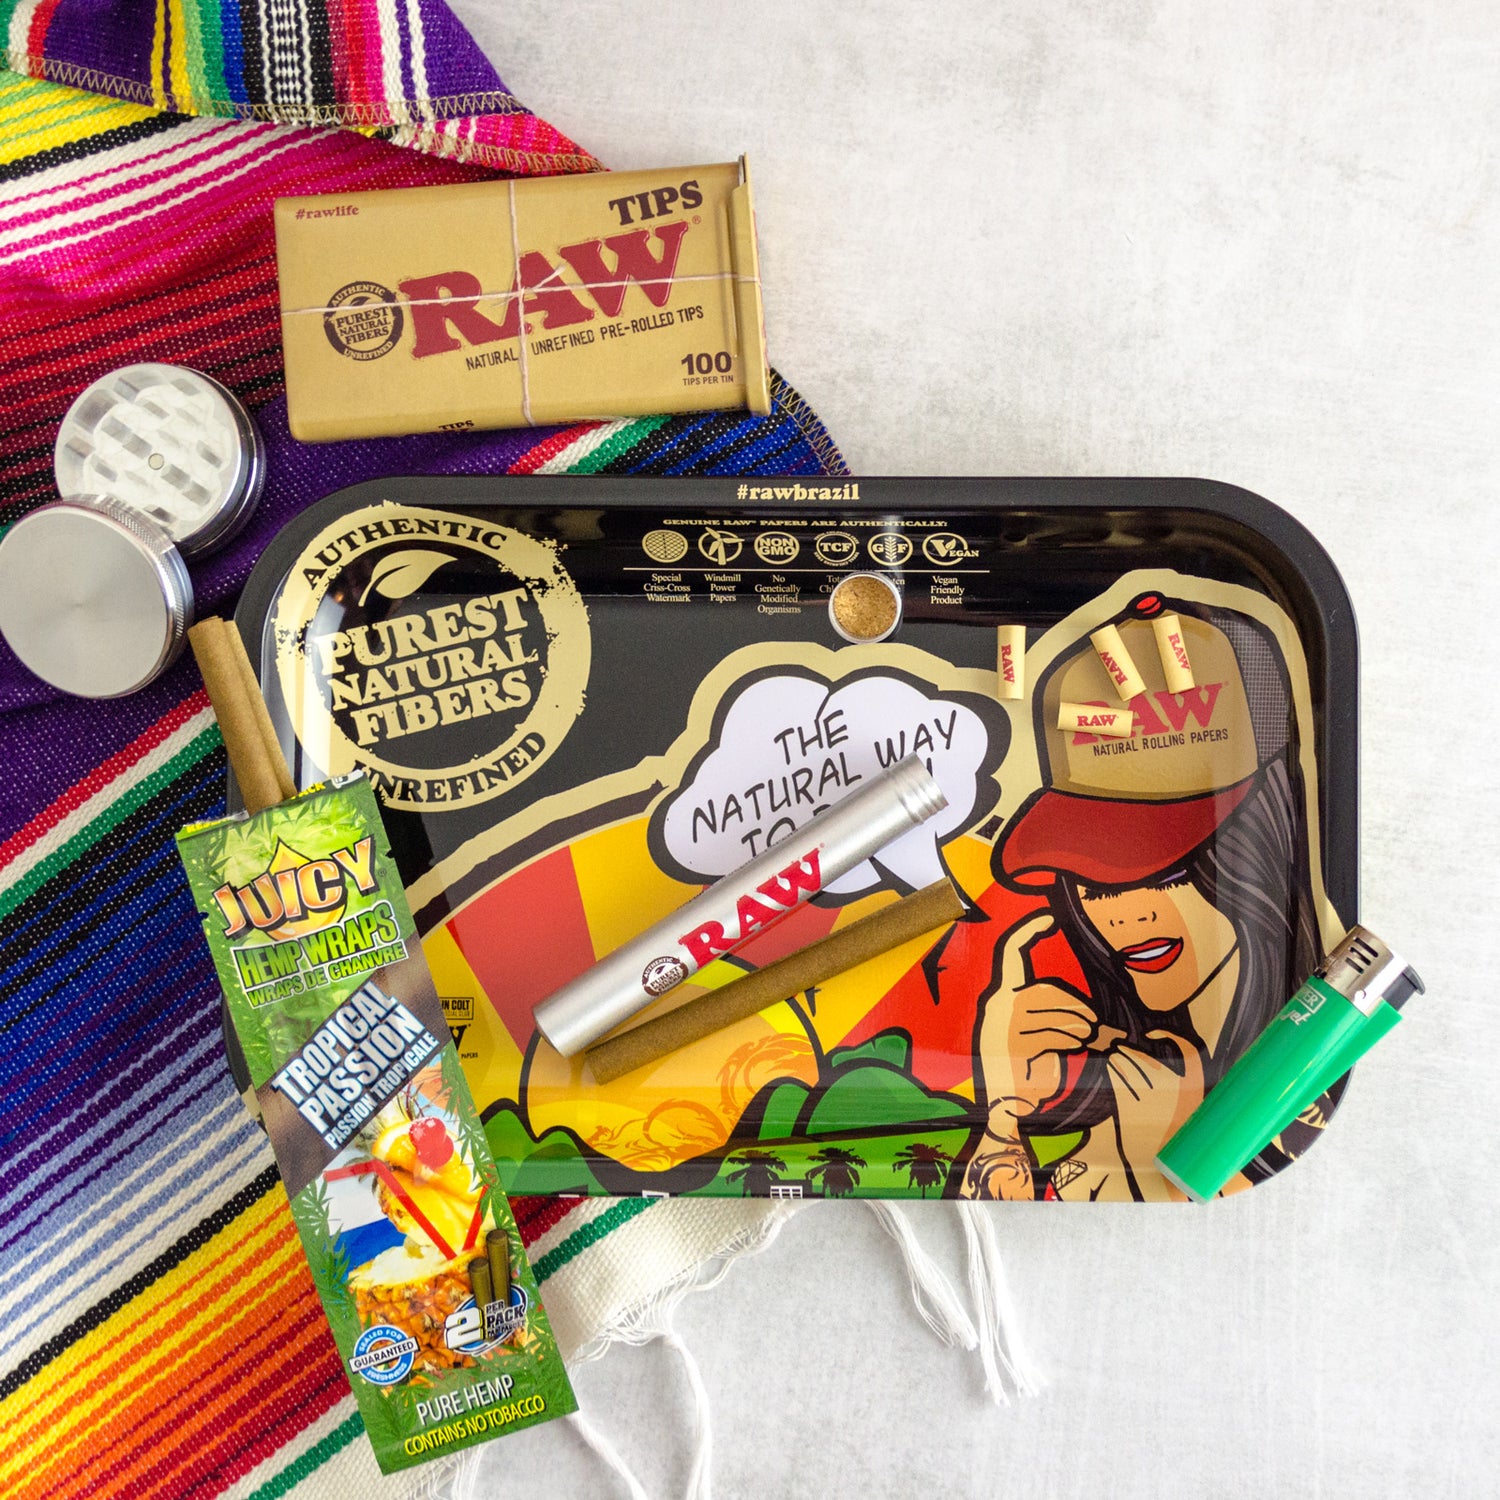 RAW Brazil Rolling Tray with Juicy Hemp Wraps, Grinder and Green Clipper Lighter